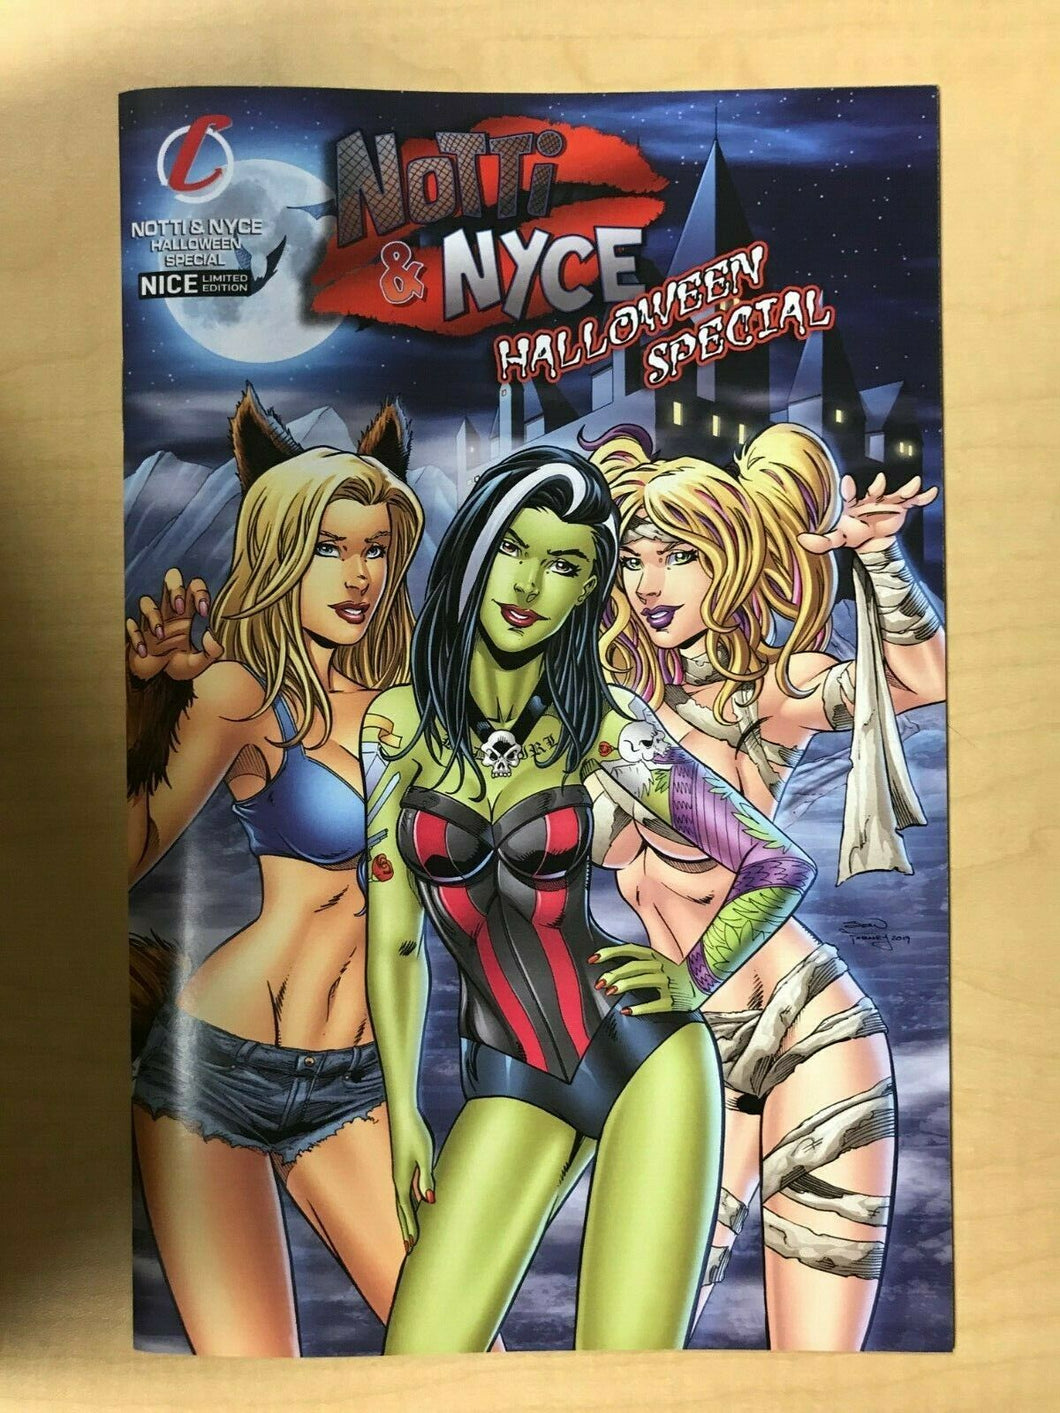 Notti & Nyce 2019 Halloween Special NICE Variant Cover by Sean Forney